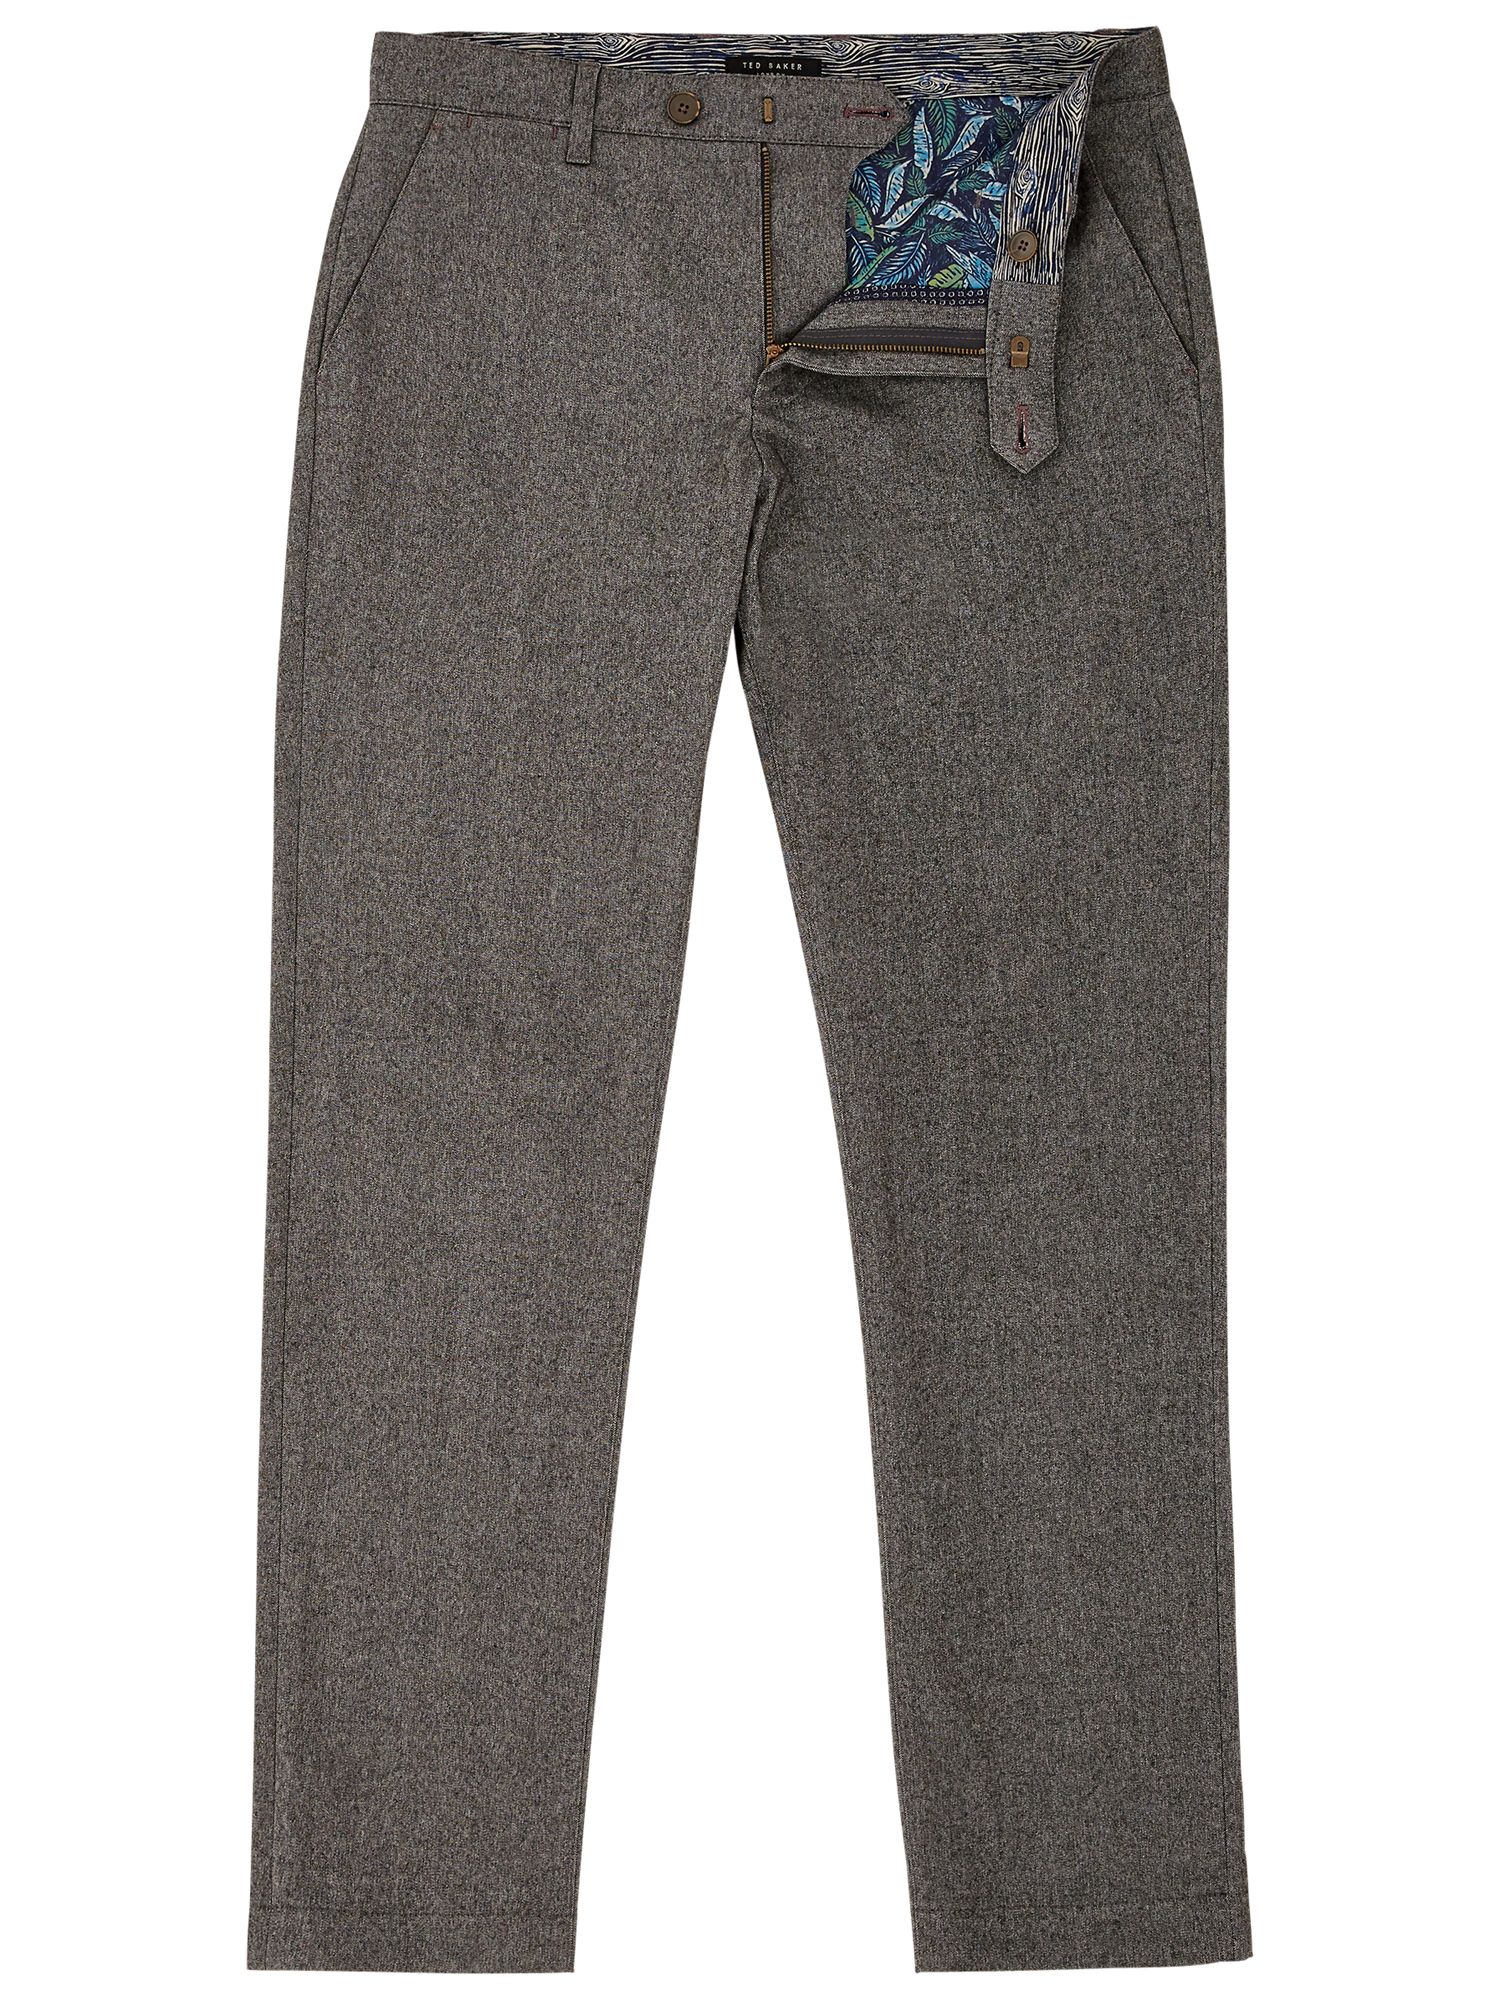 Ted Baker Classy Classic Fit Cotton Trousers